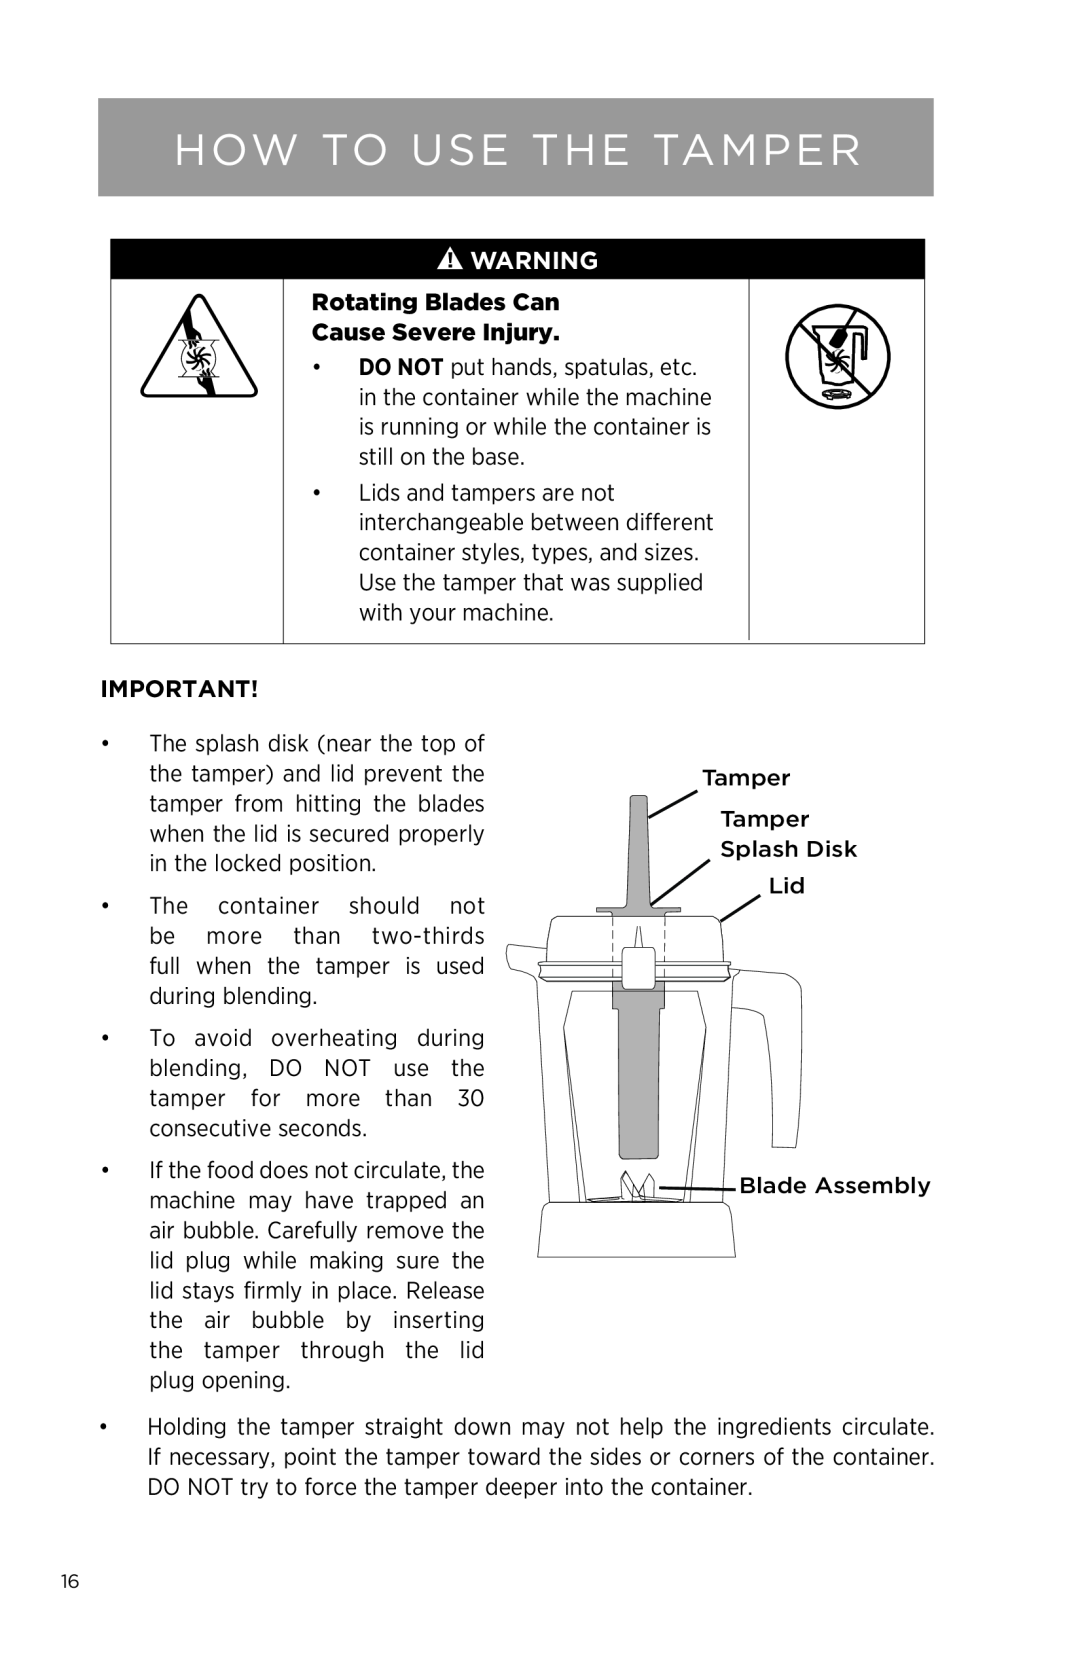 Vita-Mix NA owner manual How To Use The Tamper, Rotating Blades Can Cause Severe Injury 